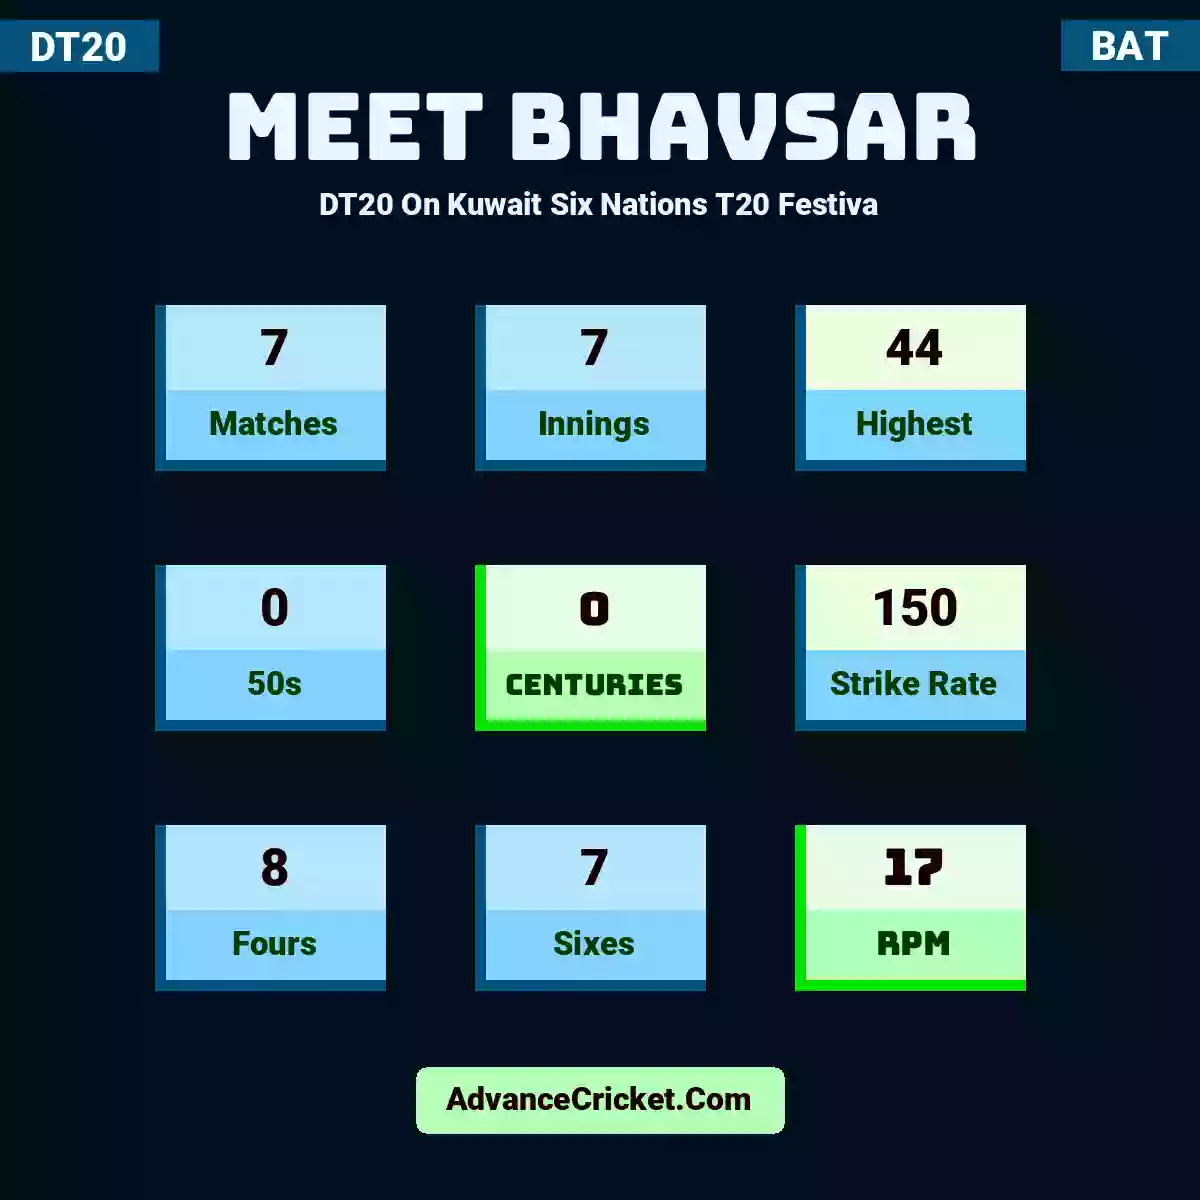 Meet Bhavsar DT20  On Kuwait Six Nations T20 Festiva, Meet Bhavsar played 7 matches, scored 44 runs as highest, 0 half-centuries, and 0 centuries, with a strike rate of 150. M.Bhavsar hit 8 fours and 7 sixes, with an RPM of 17.